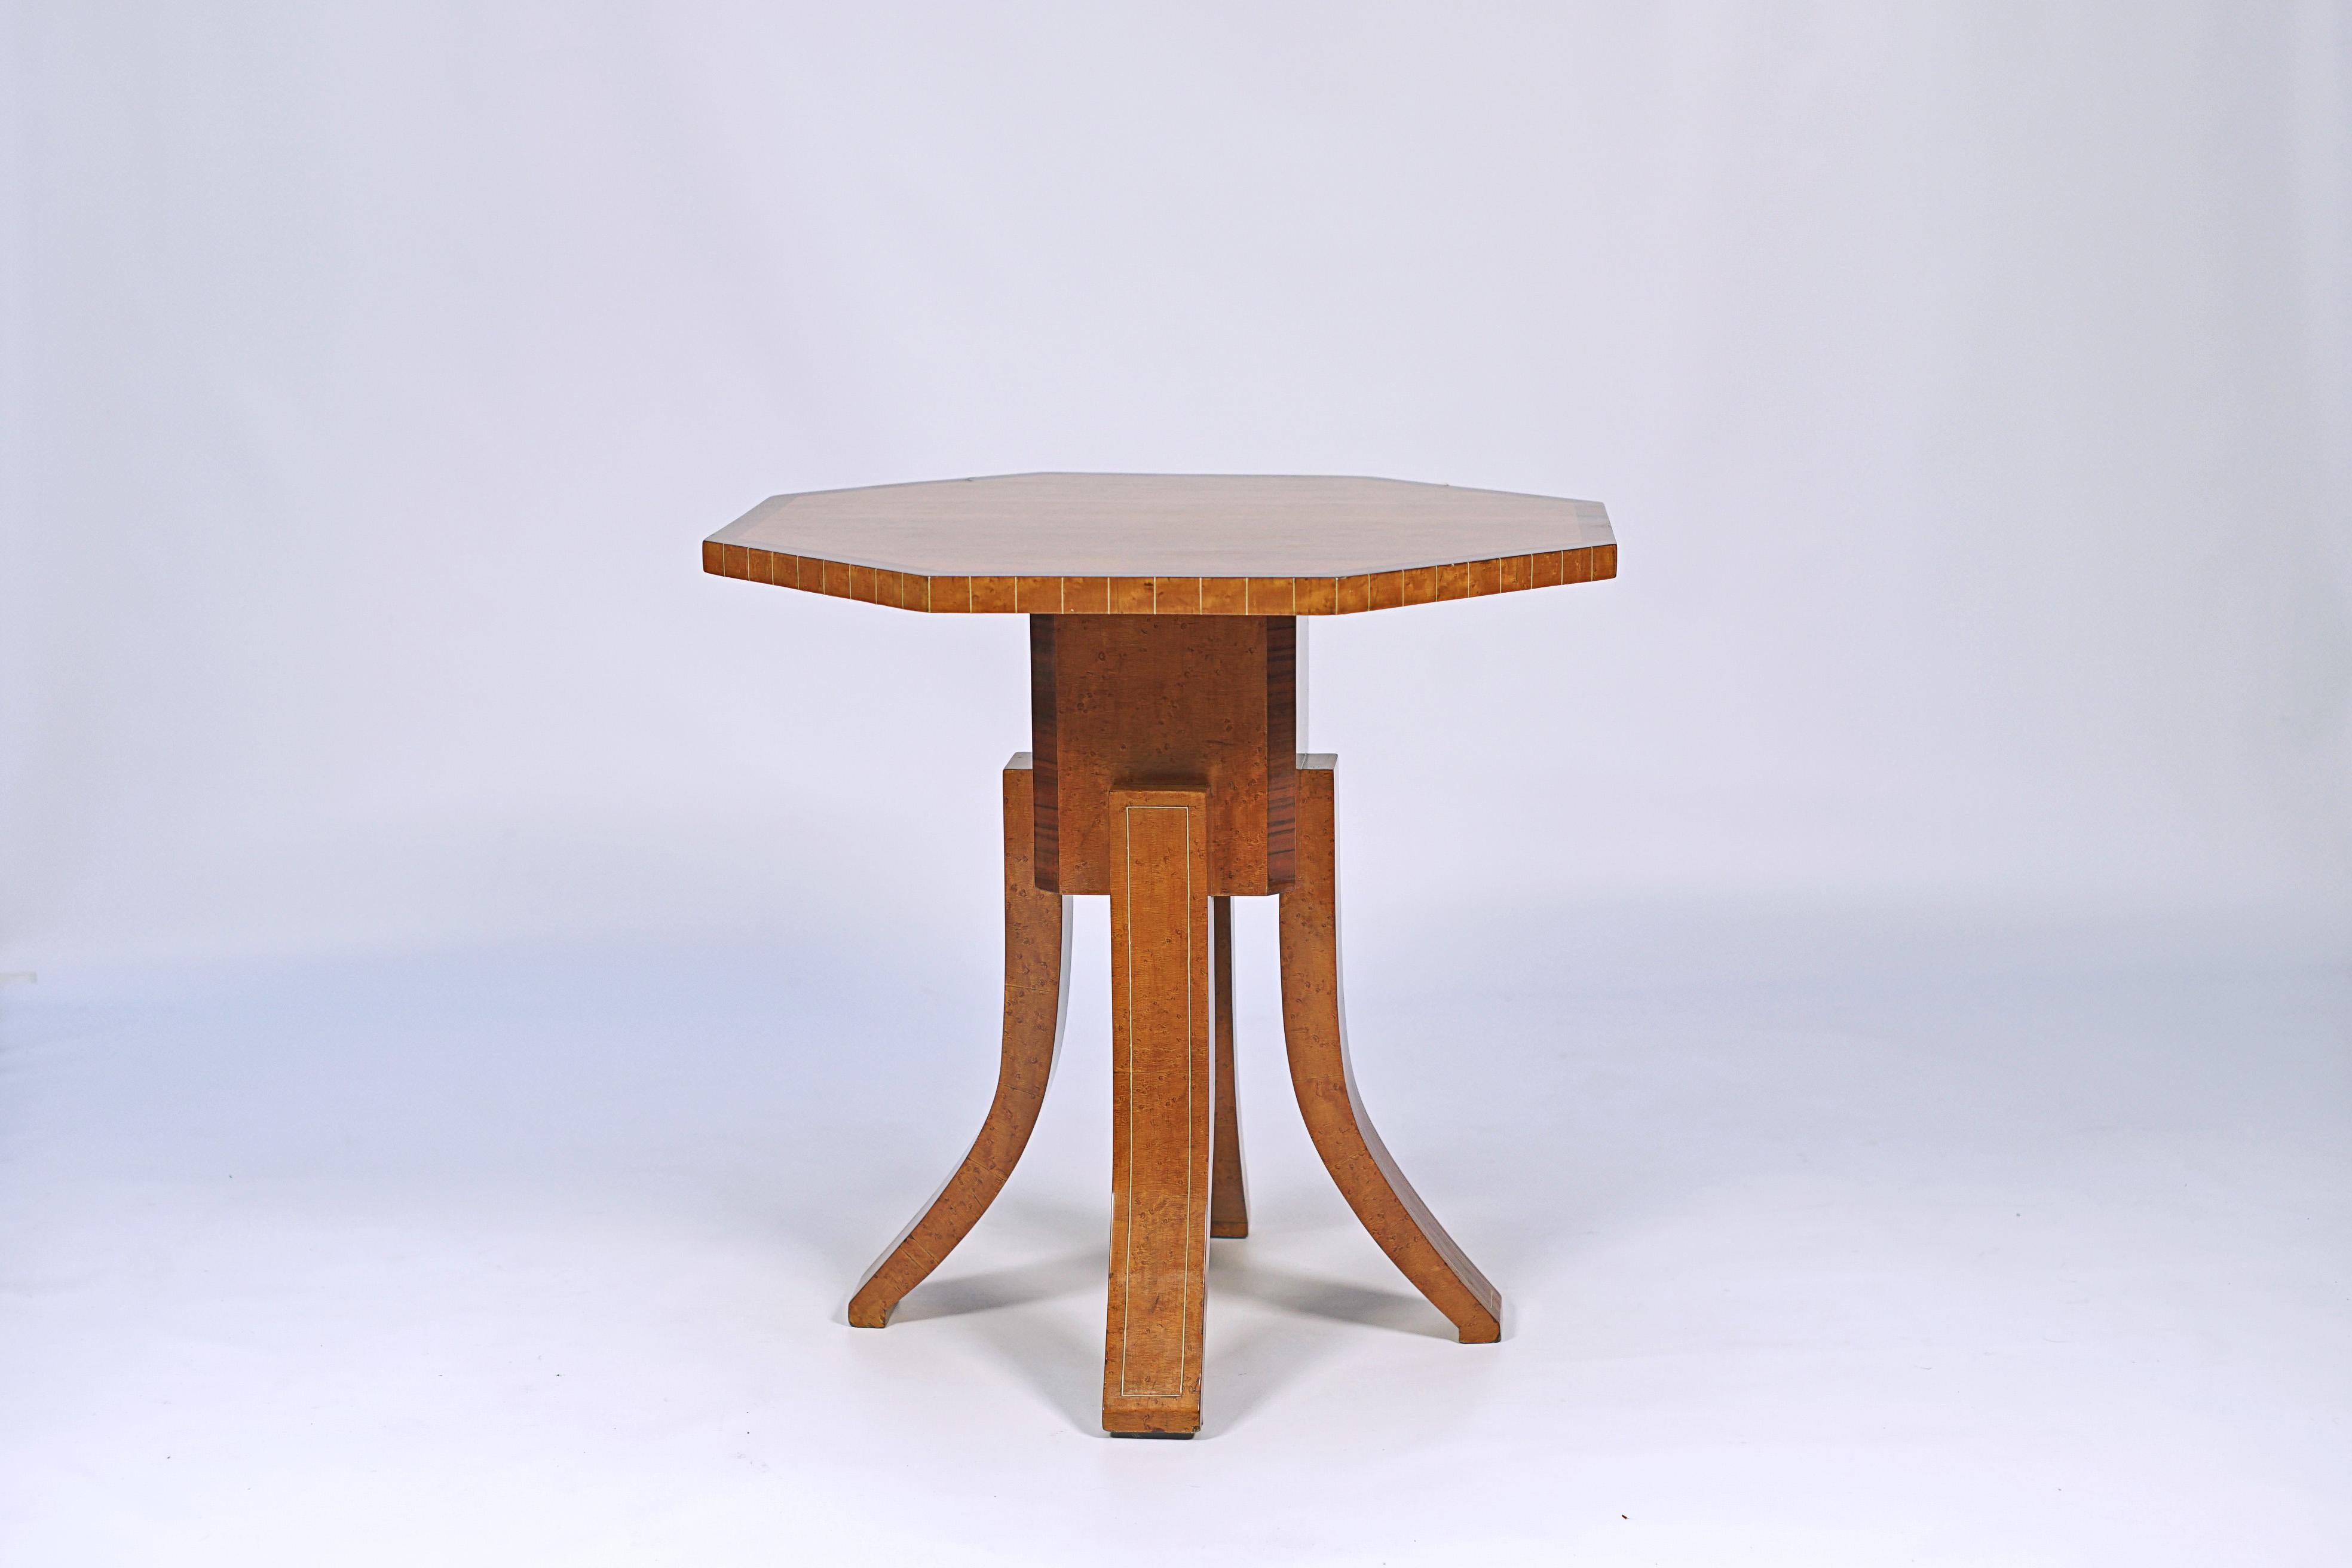 Octogonal table designed by Michel Dufet (1888-1985). Birch wood veneer and inlays.

France, CIRCA 1930.